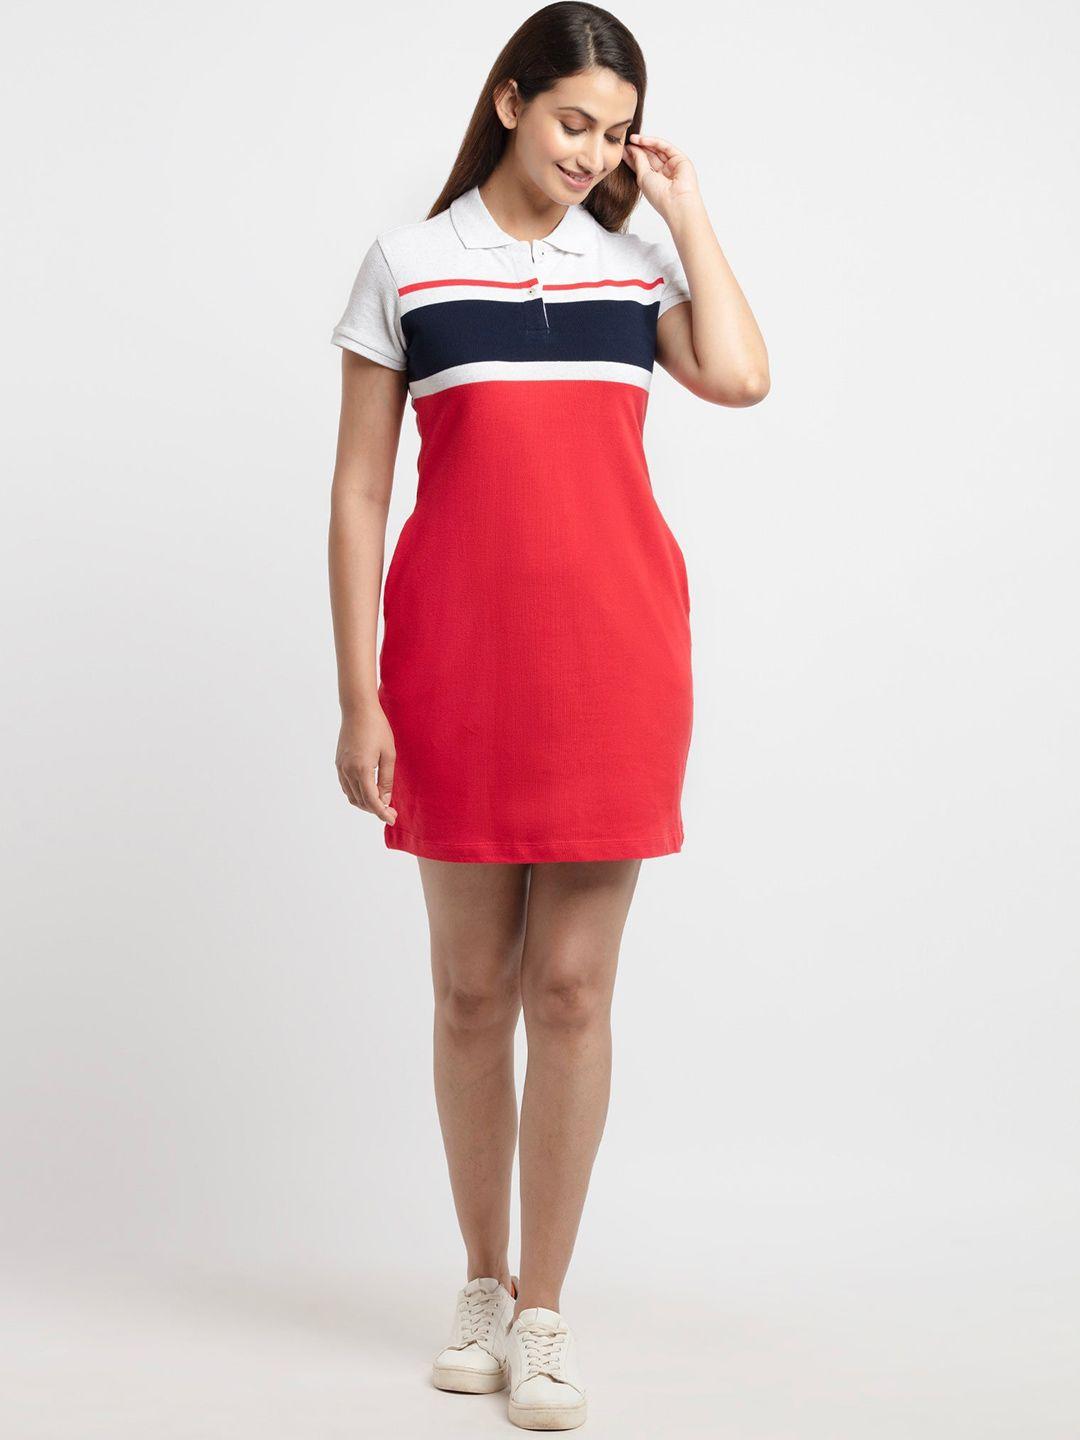 status quo white and red colourblocked t-shirt dress